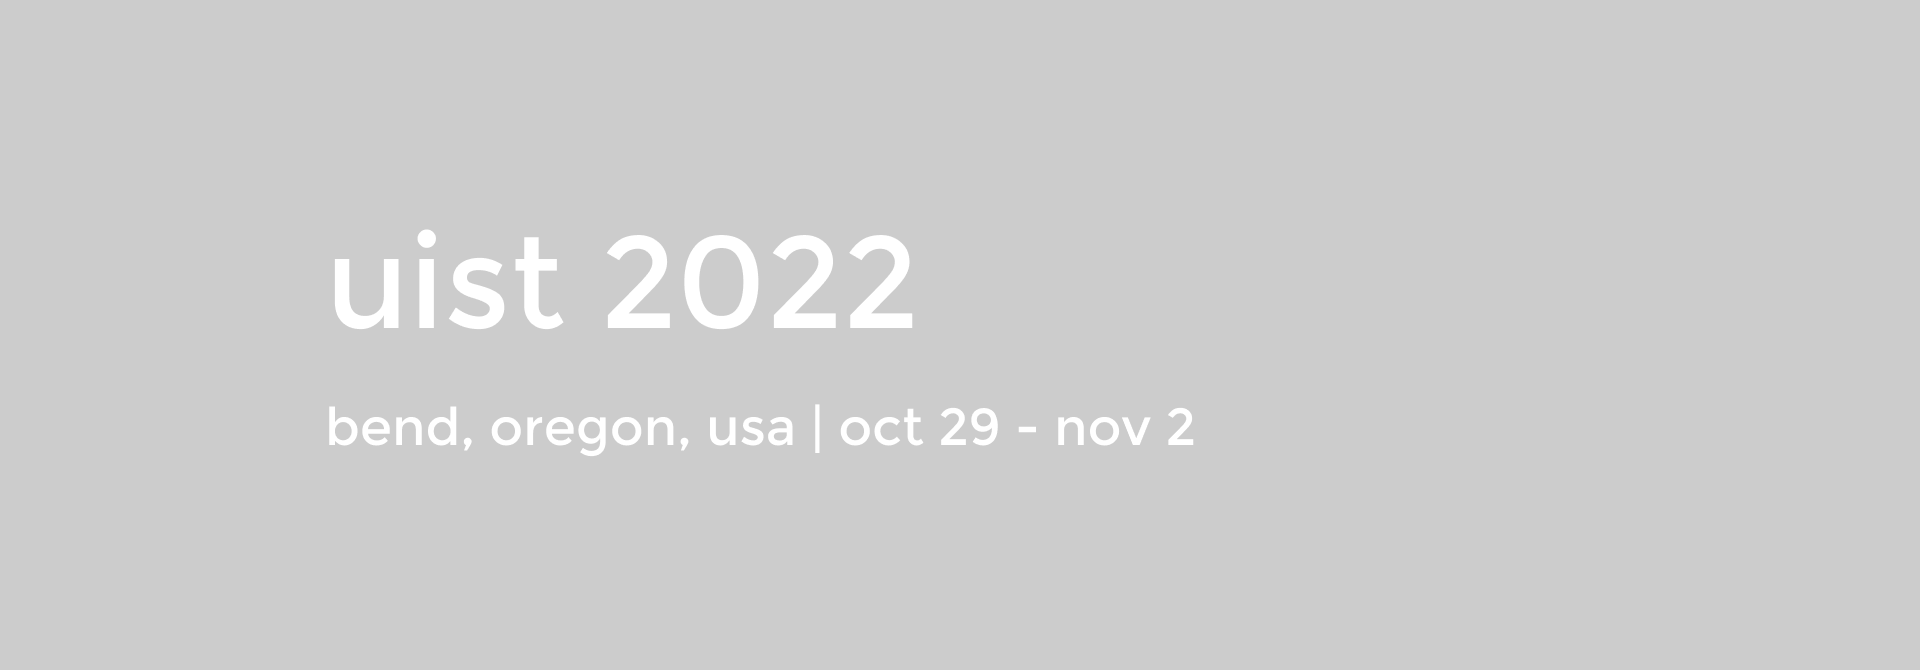 Banner: UIST 2022, Bend Oregon USA, October 29 to November 2, more details to be announced.